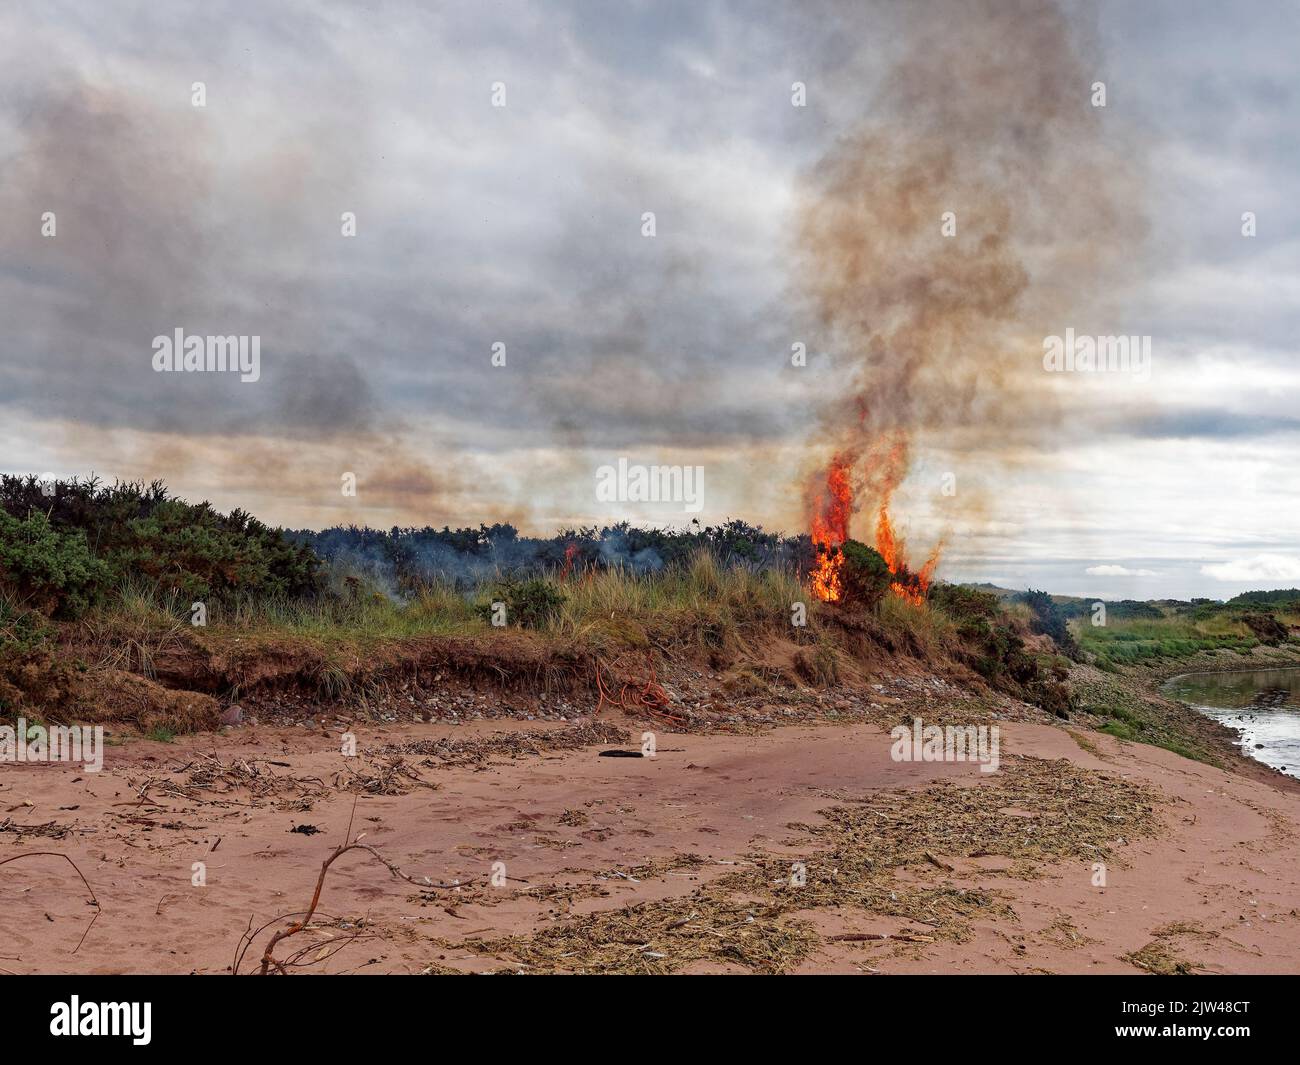 Flames and smoke from a Wildfire in the Gorse and Grasses at the Dunes of Montrose Beach on a Summers evening Stock Photo